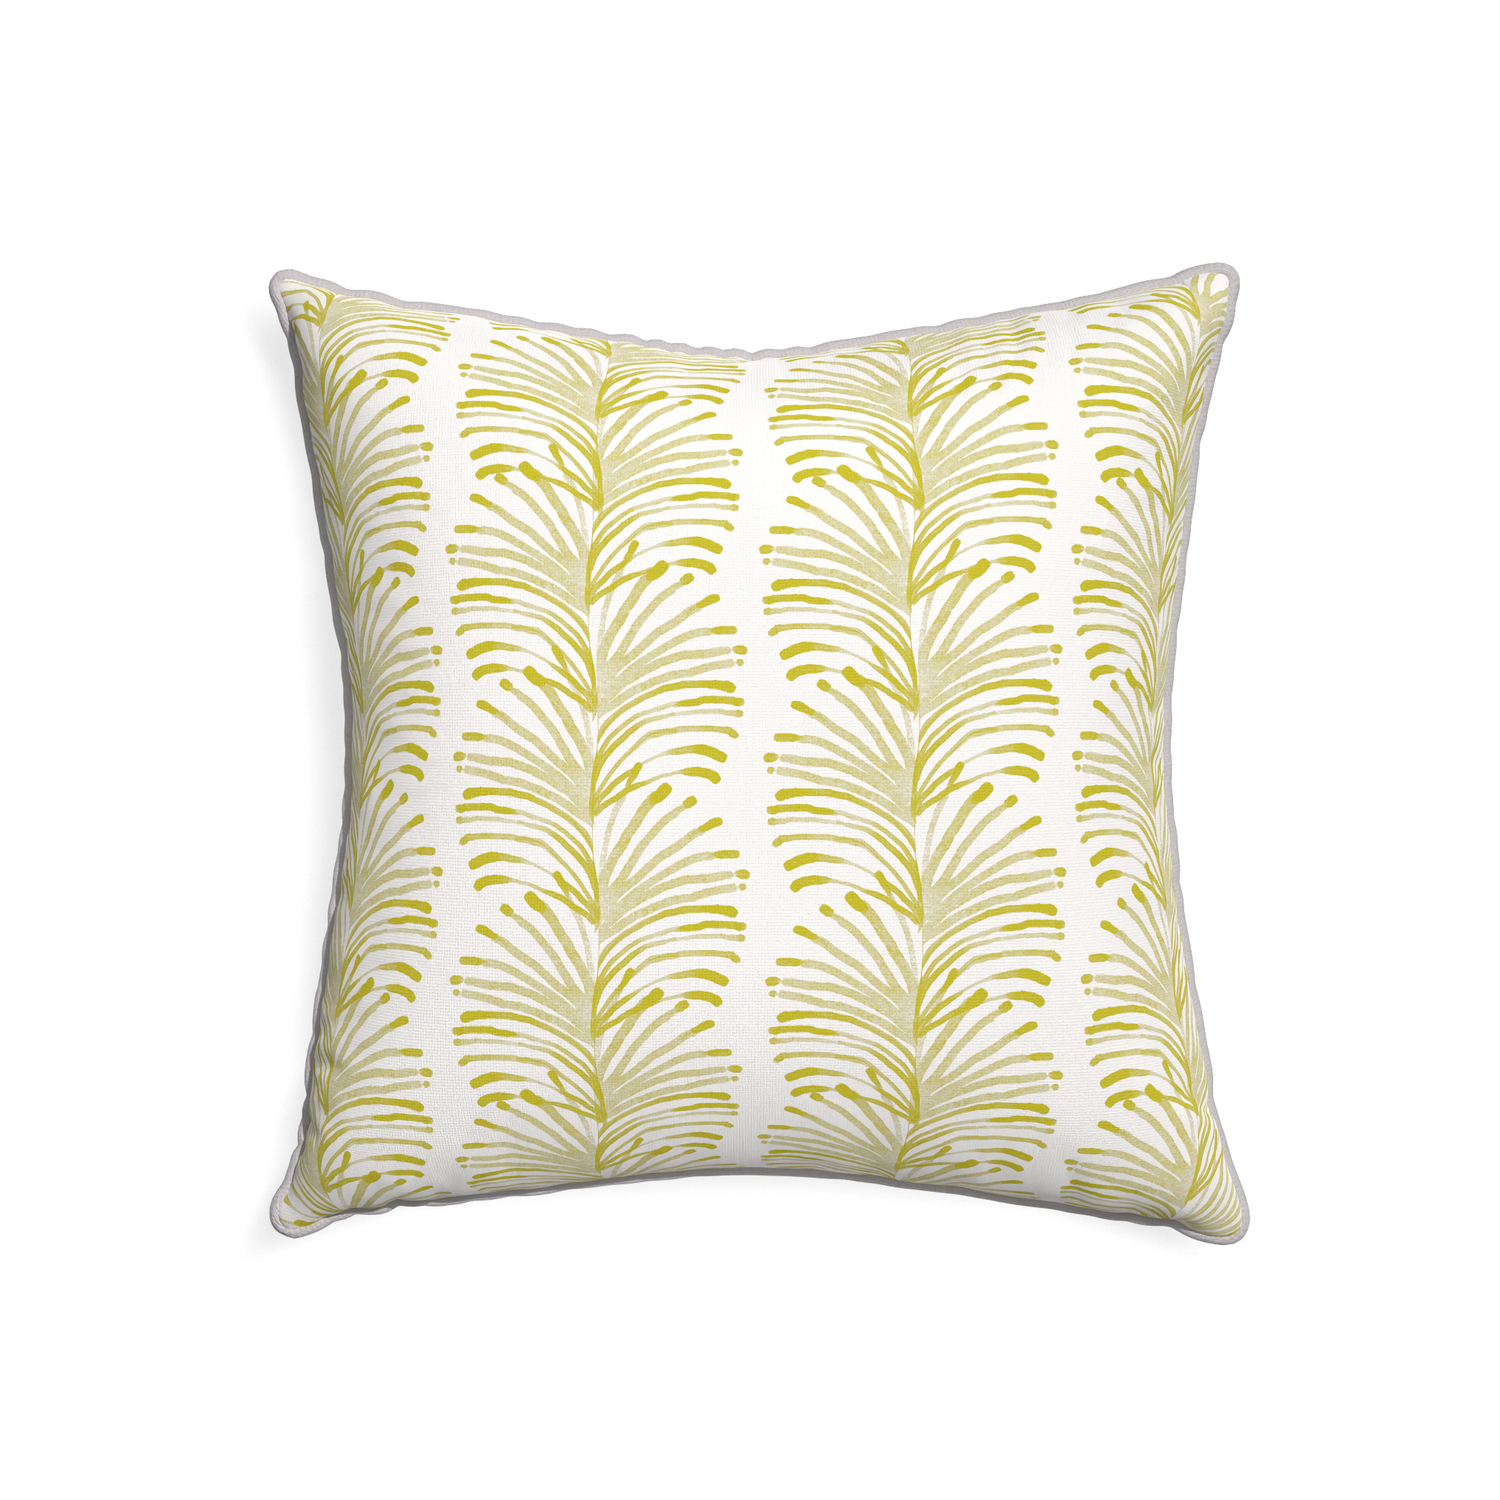 22-square emma chartreuse custom yellow stripe chartreusepillow with pebble piping on white background